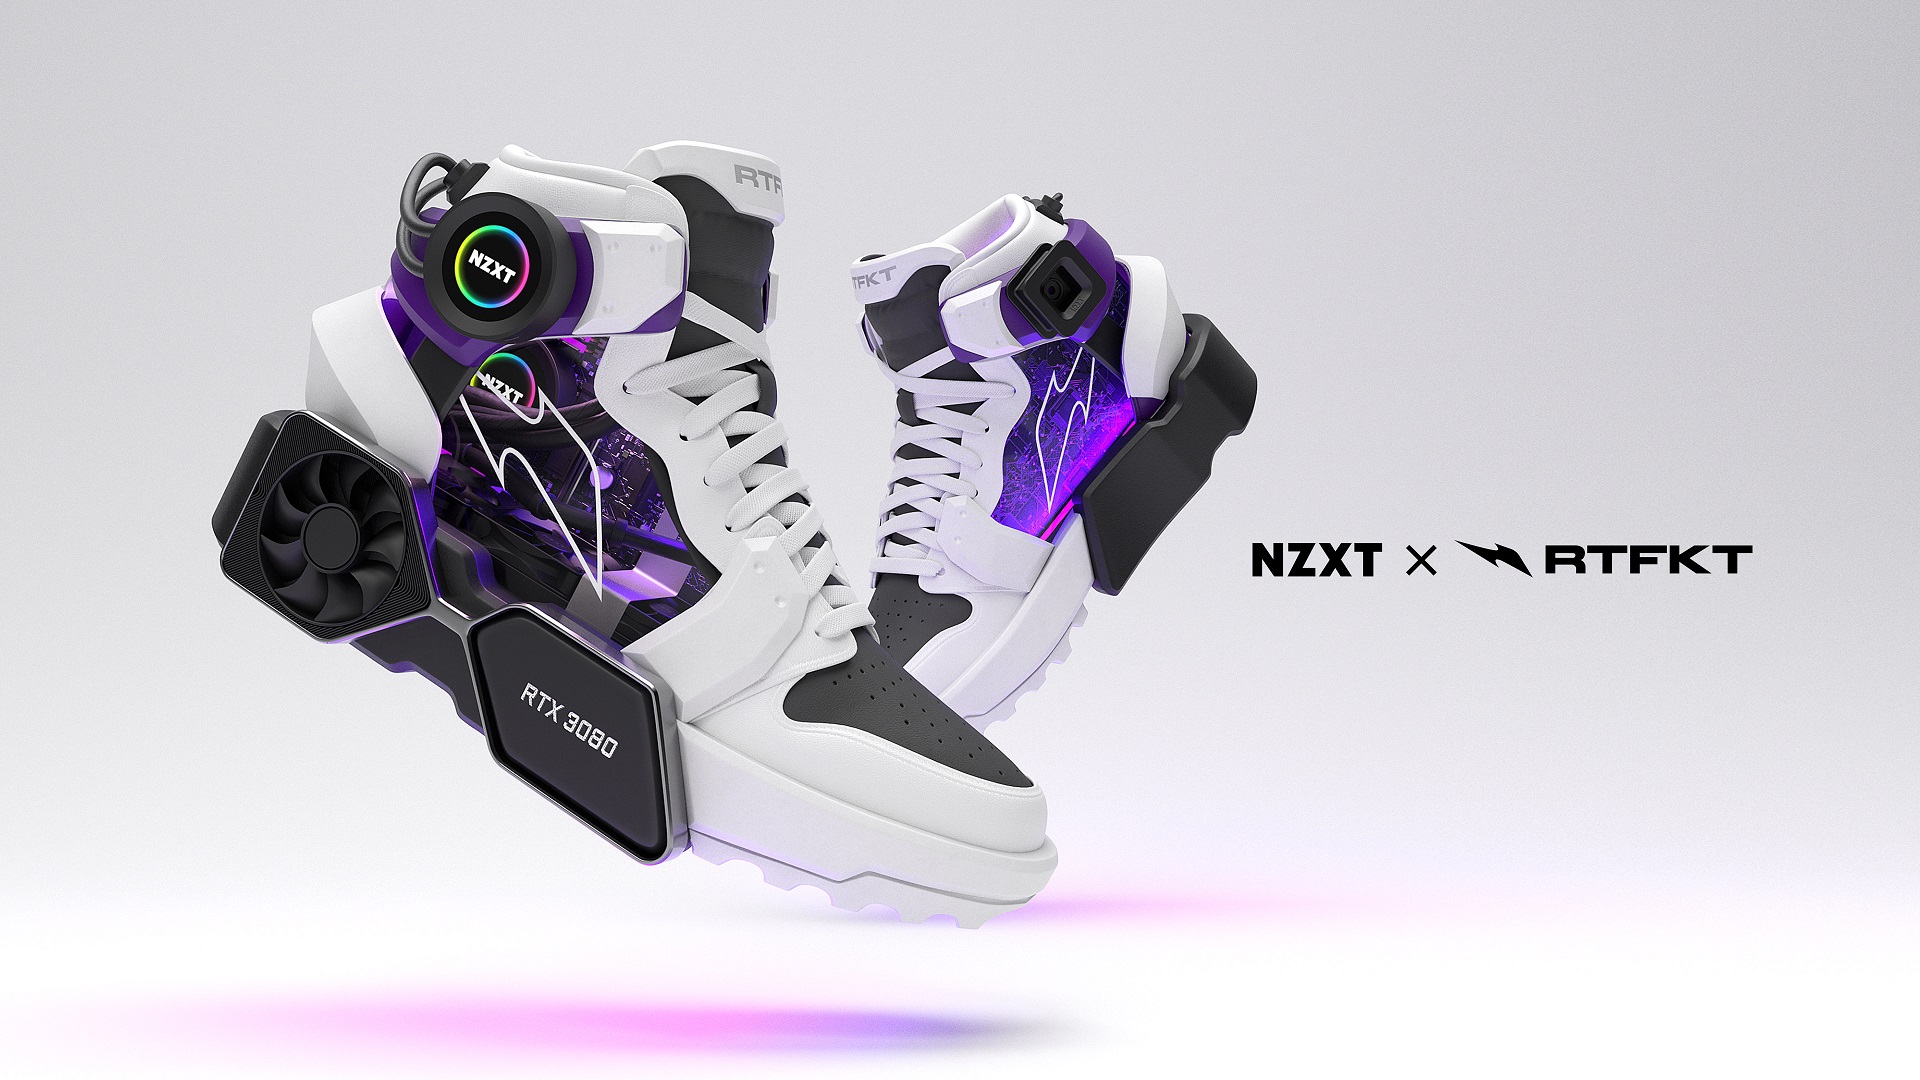 Nike just bought a virtual shoe company that makes NFTs and sneakers 'for  the metaverse' - The Verge